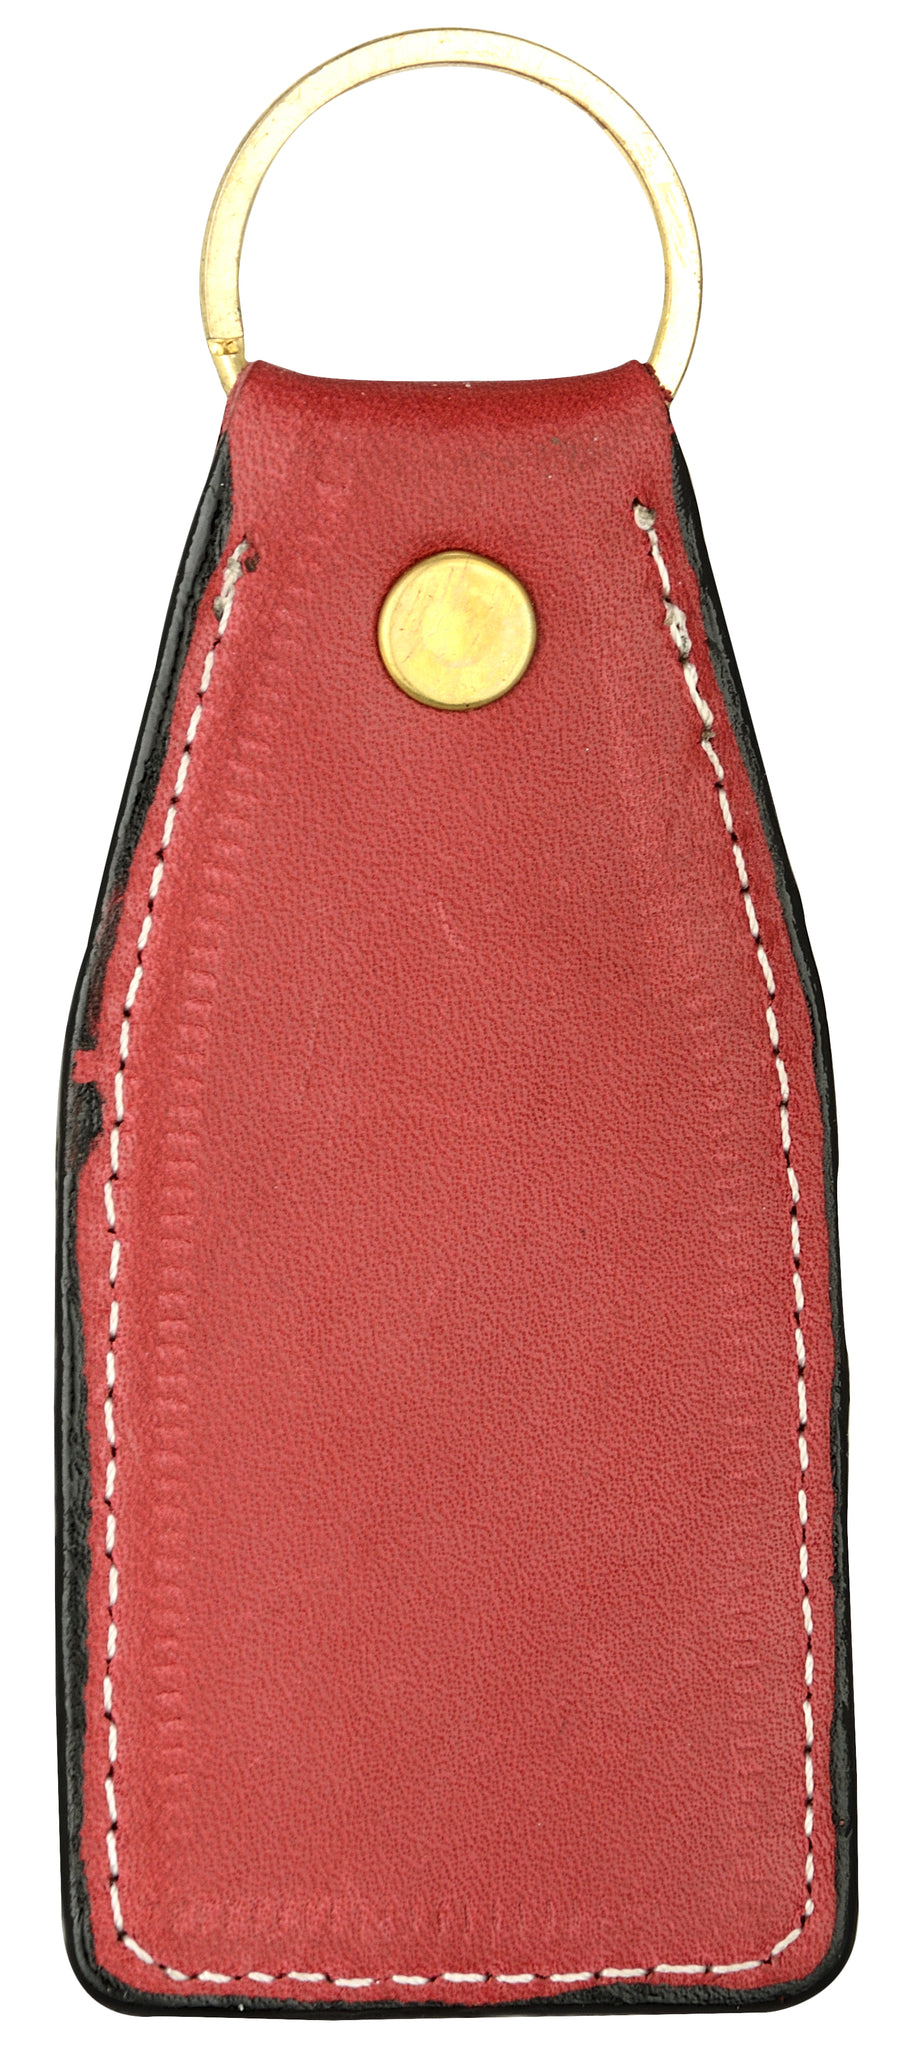 Carrot red leather key chain